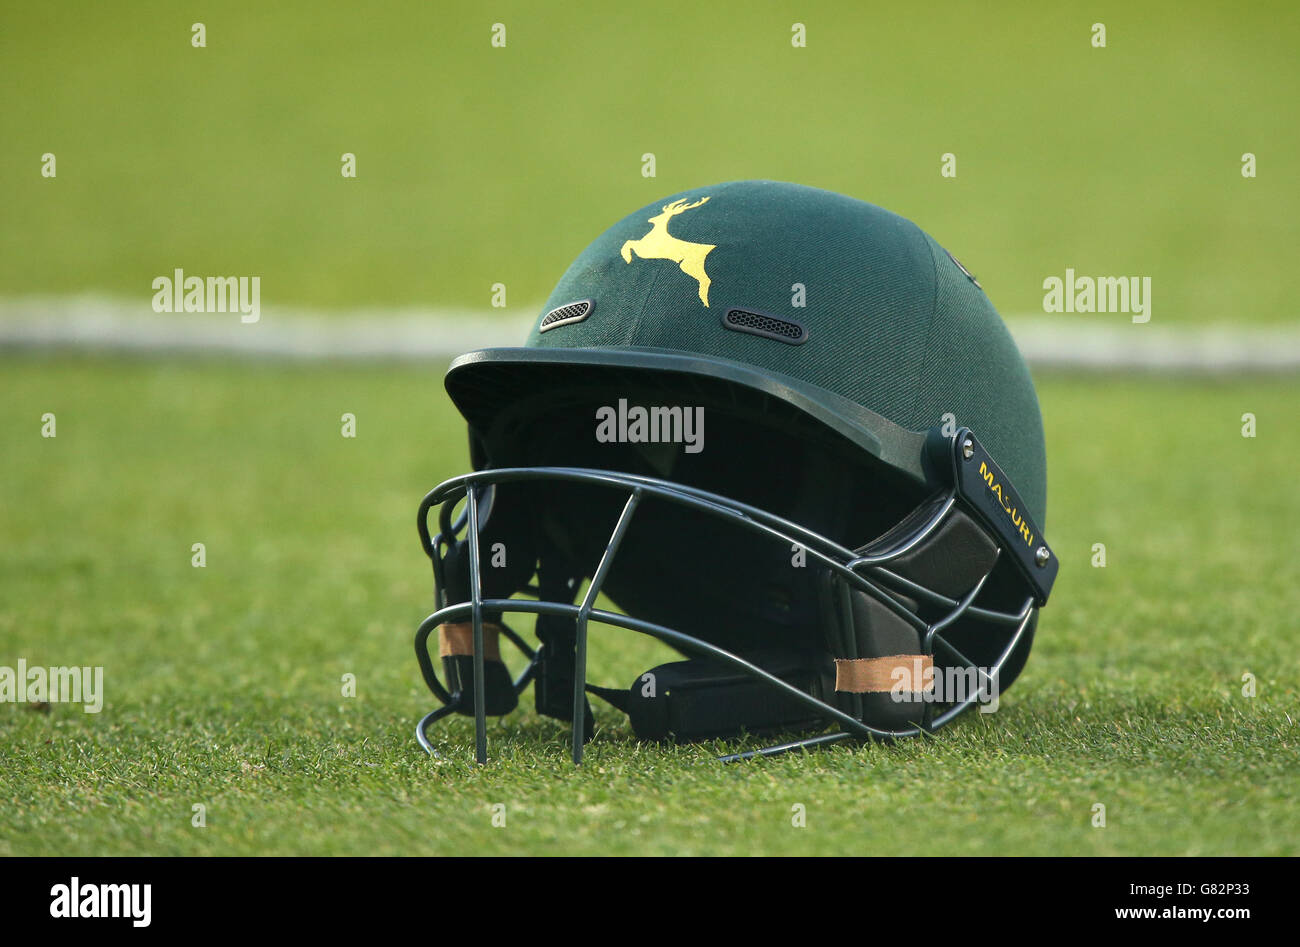 A general view of a Nottinghamshire Outlaws helmet during the NatWest T20 Blast at Trent Bridge, Nottingham. Stock Photo